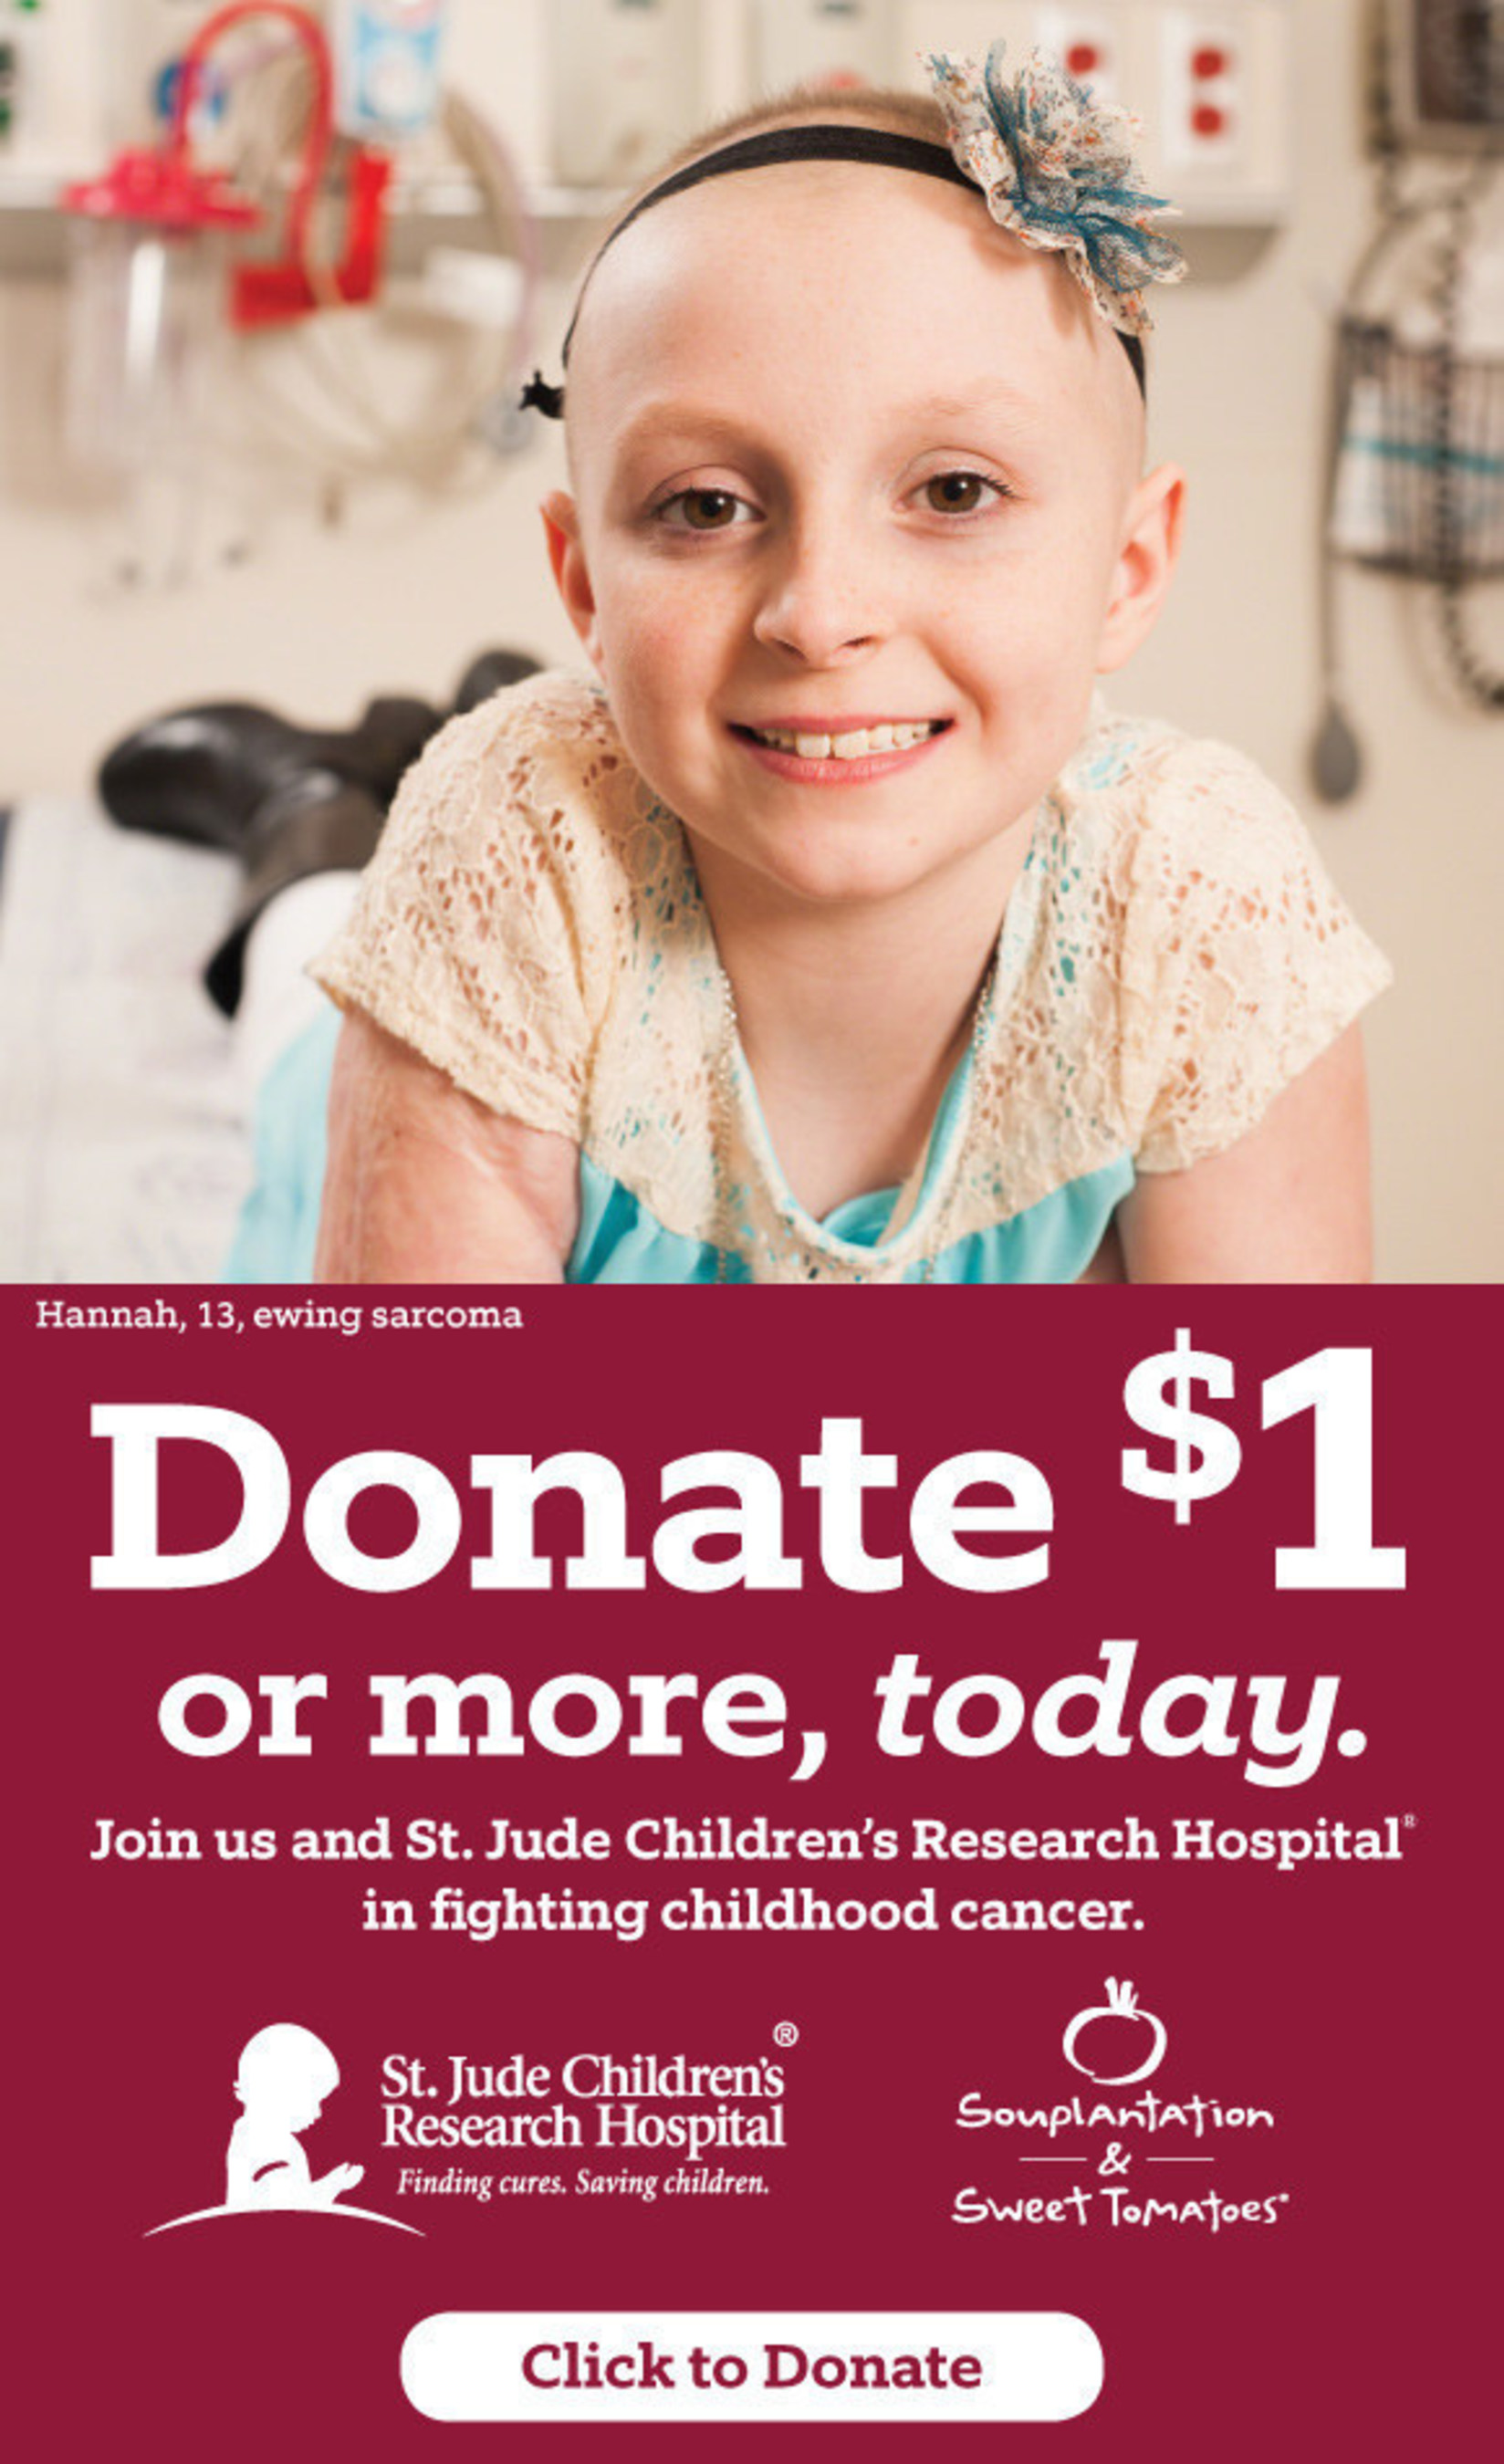 Souplantation and Sweet Tomatoes restaurant guests and others are invited to support the St. Jude Children's Research Hospital campaign.  Joining the effort can be done in the restaurants or online.